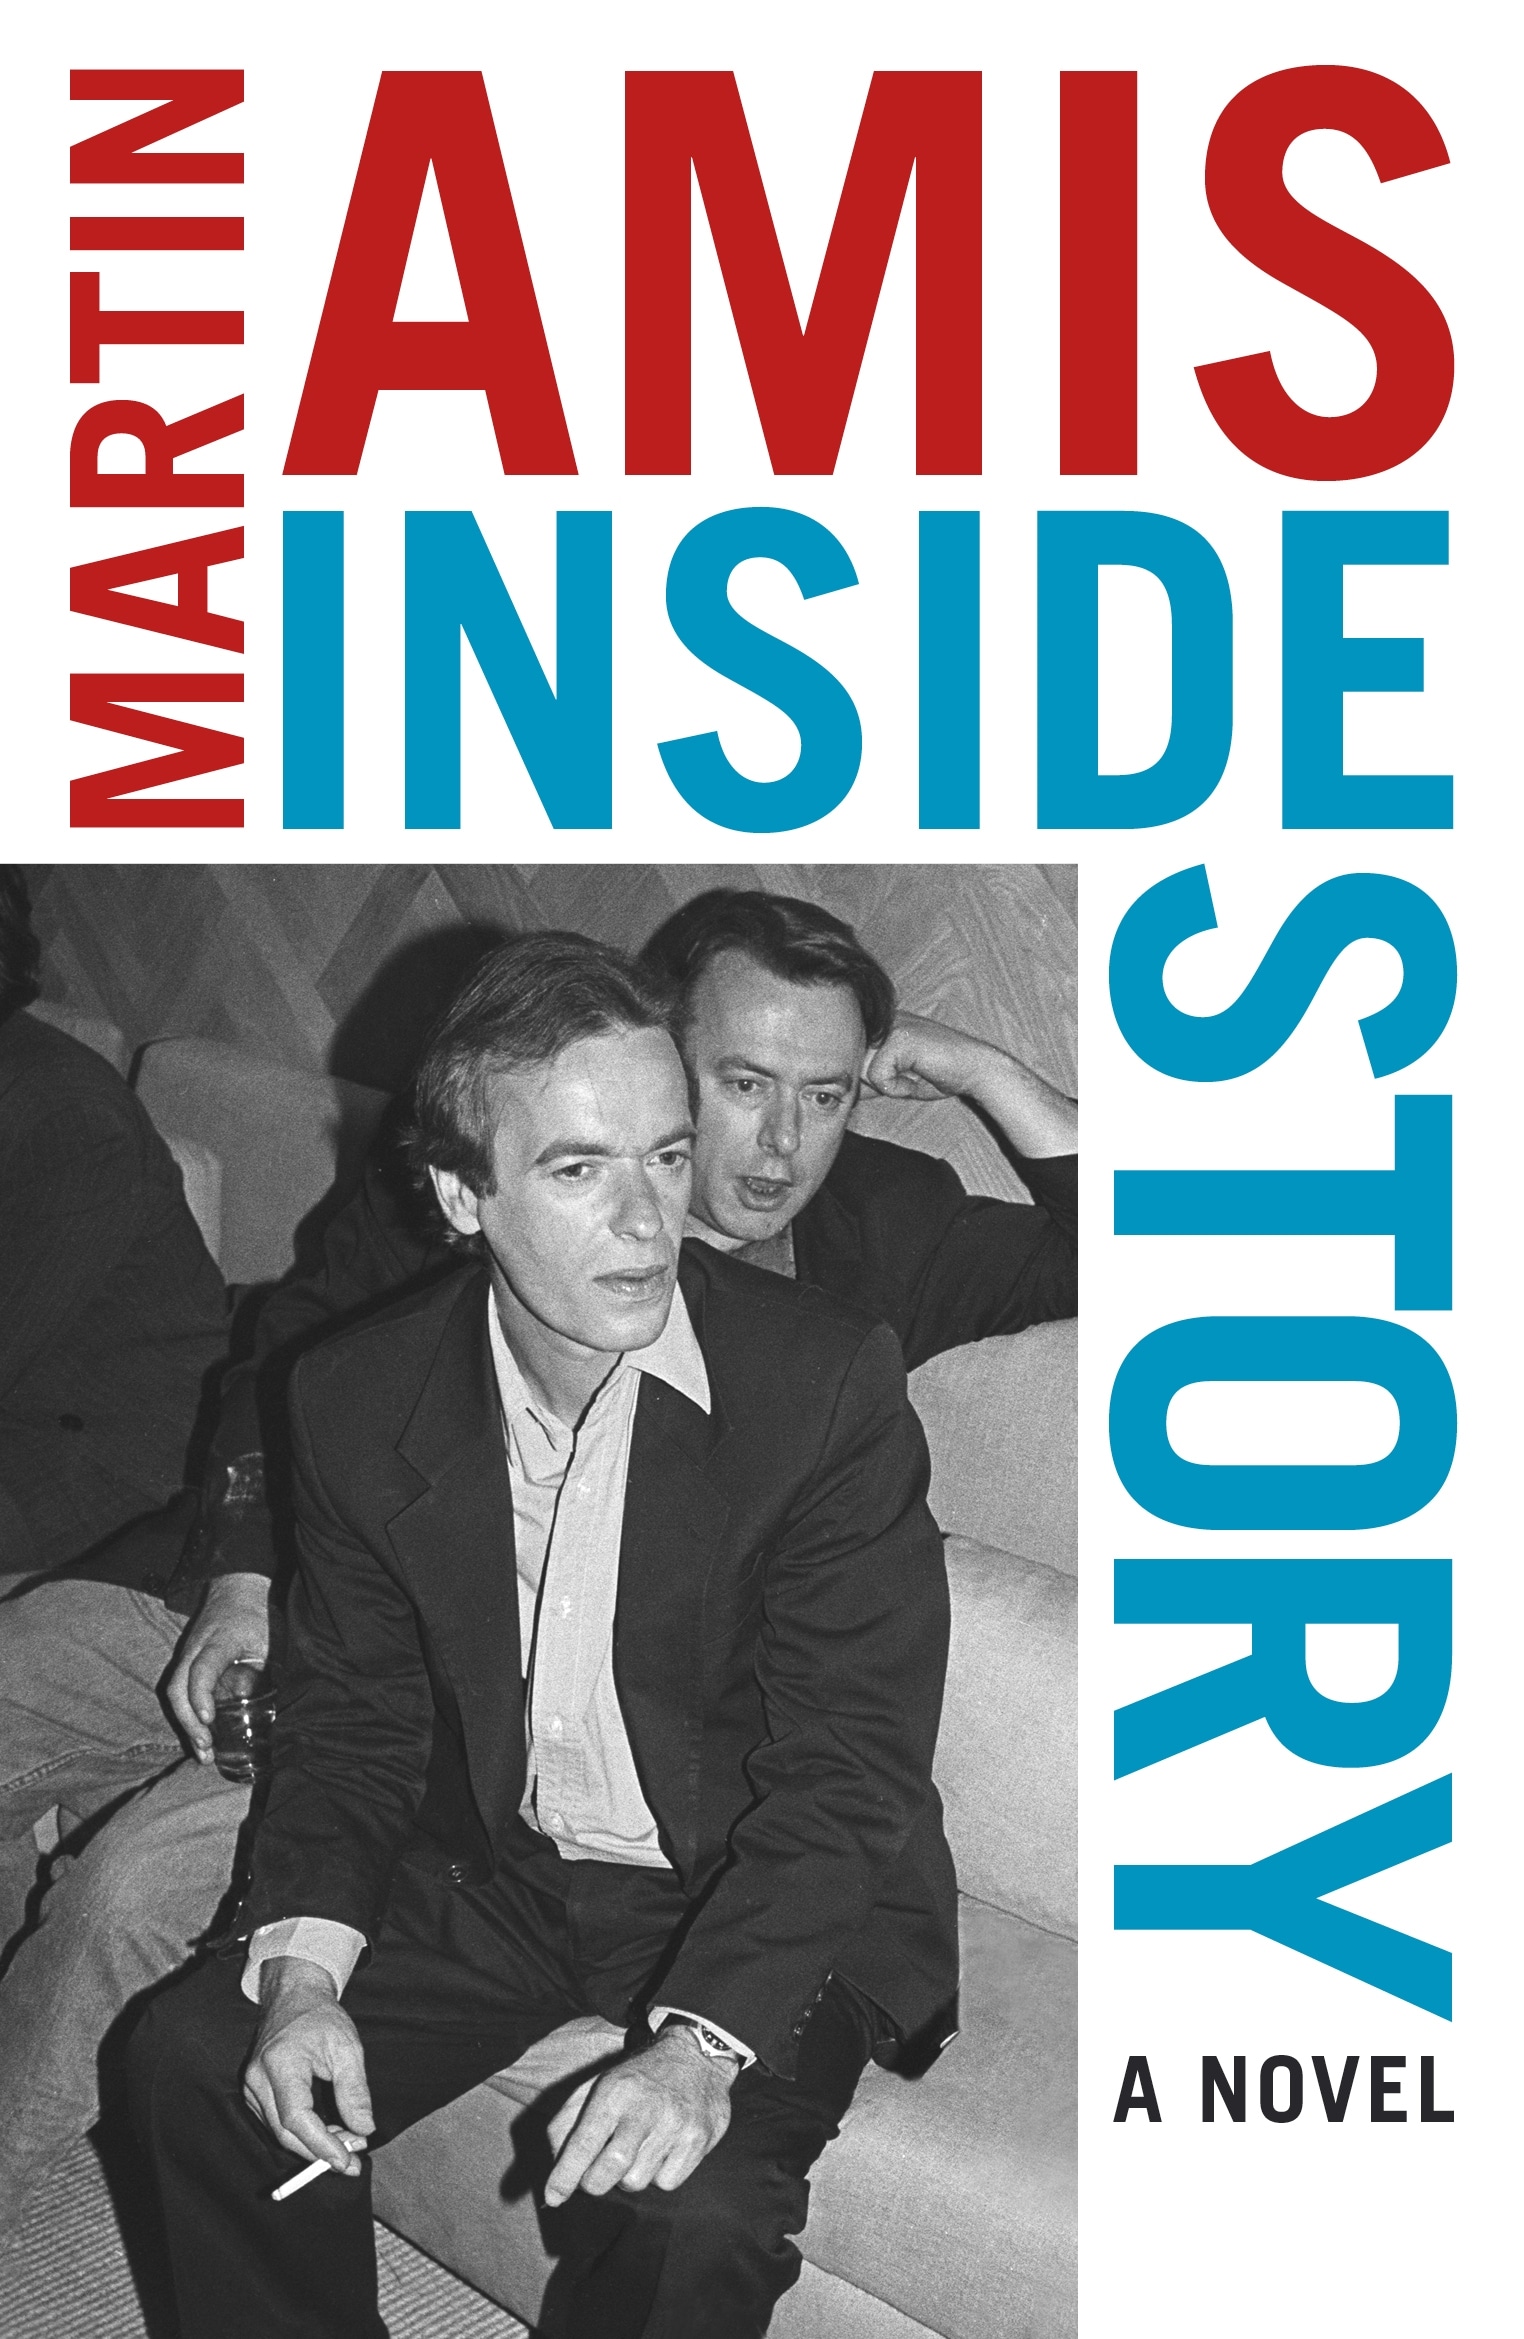 Book “Inside Story” by Martin Amis — August 5, 2021